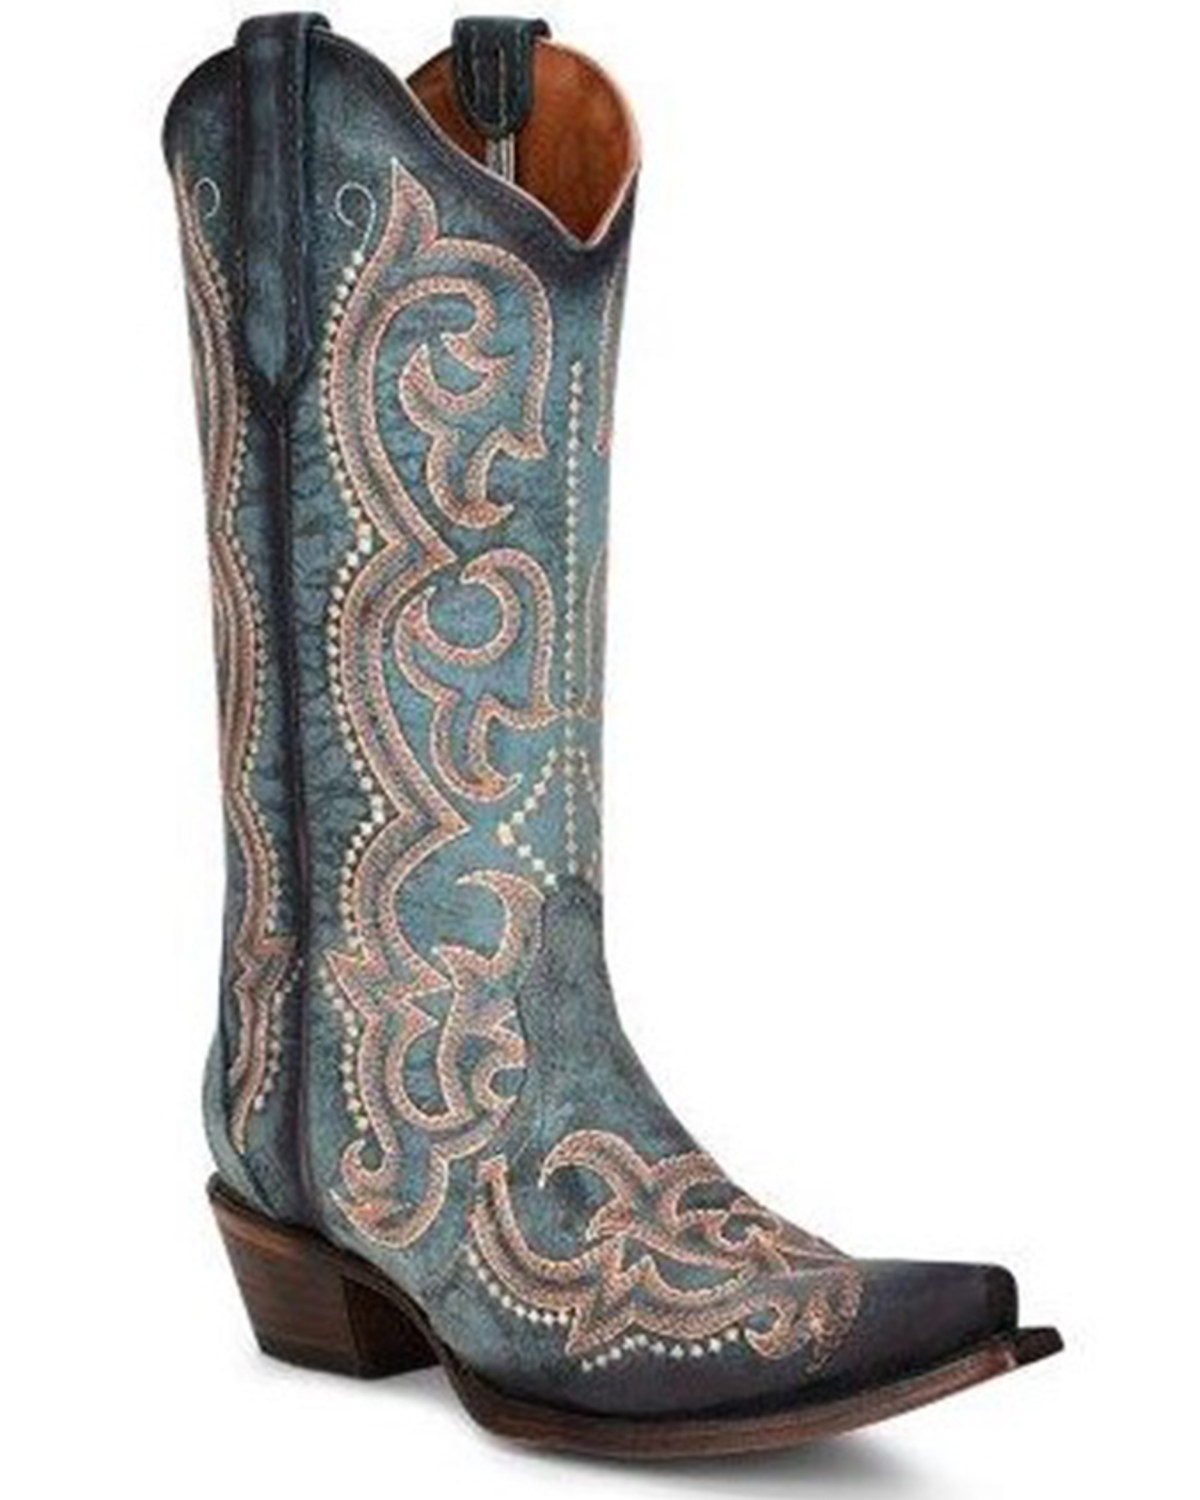 Corral Women's Vintage Jean Embroidered Tall Western Boots - Snip Toe